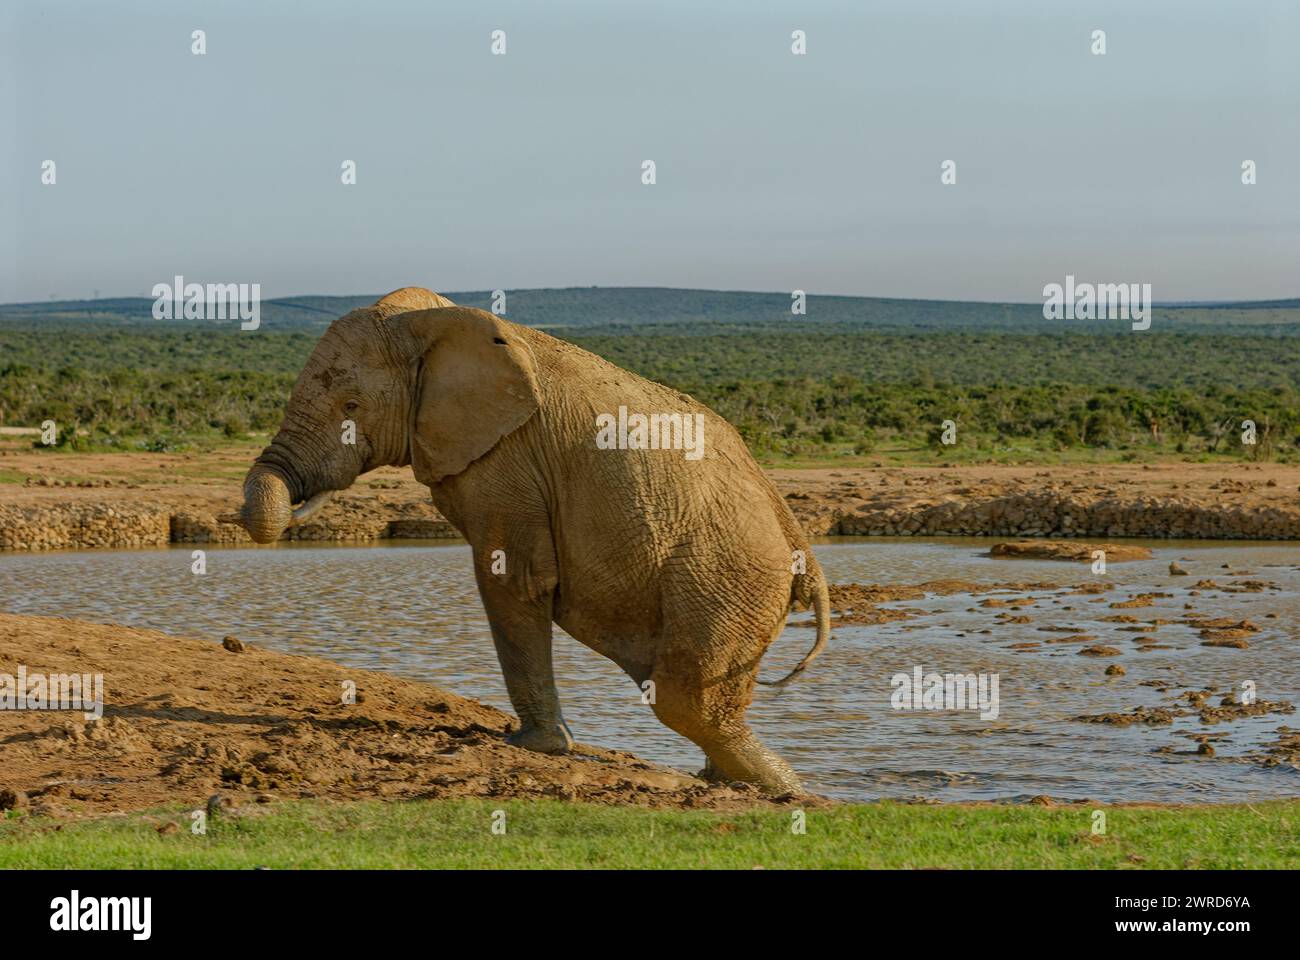 A large, muddy elephant with a knotted trunk climbing out of a water hole. Stock Photo